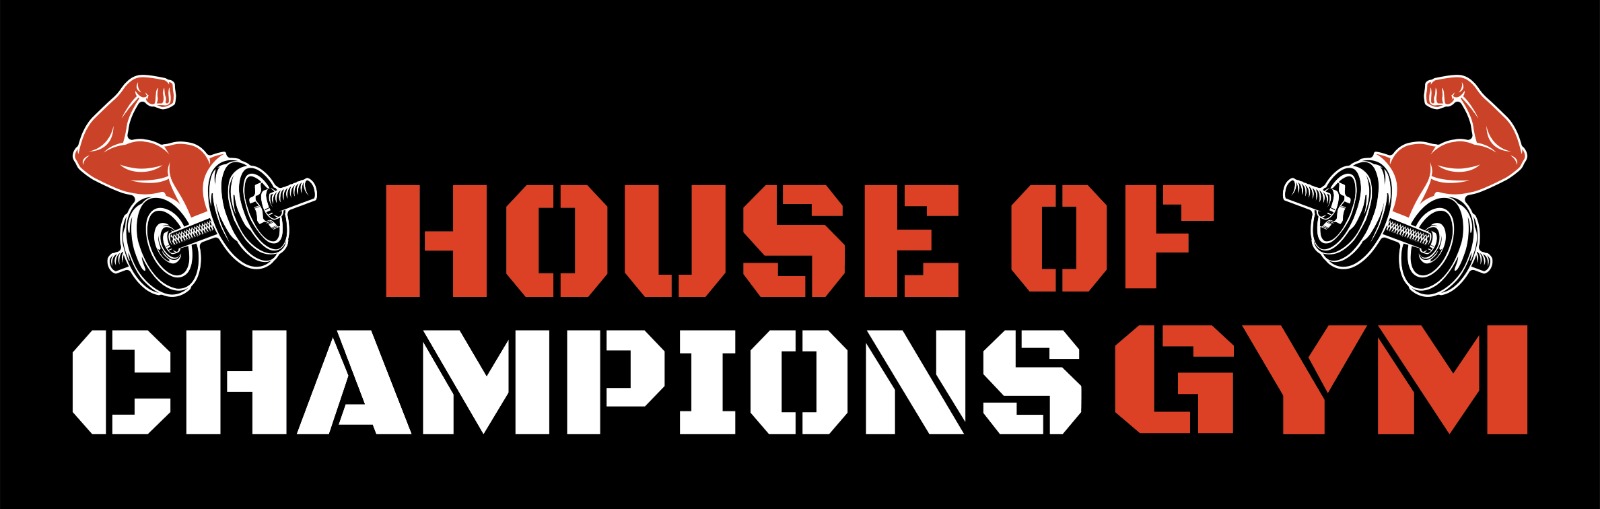 House Of Champions